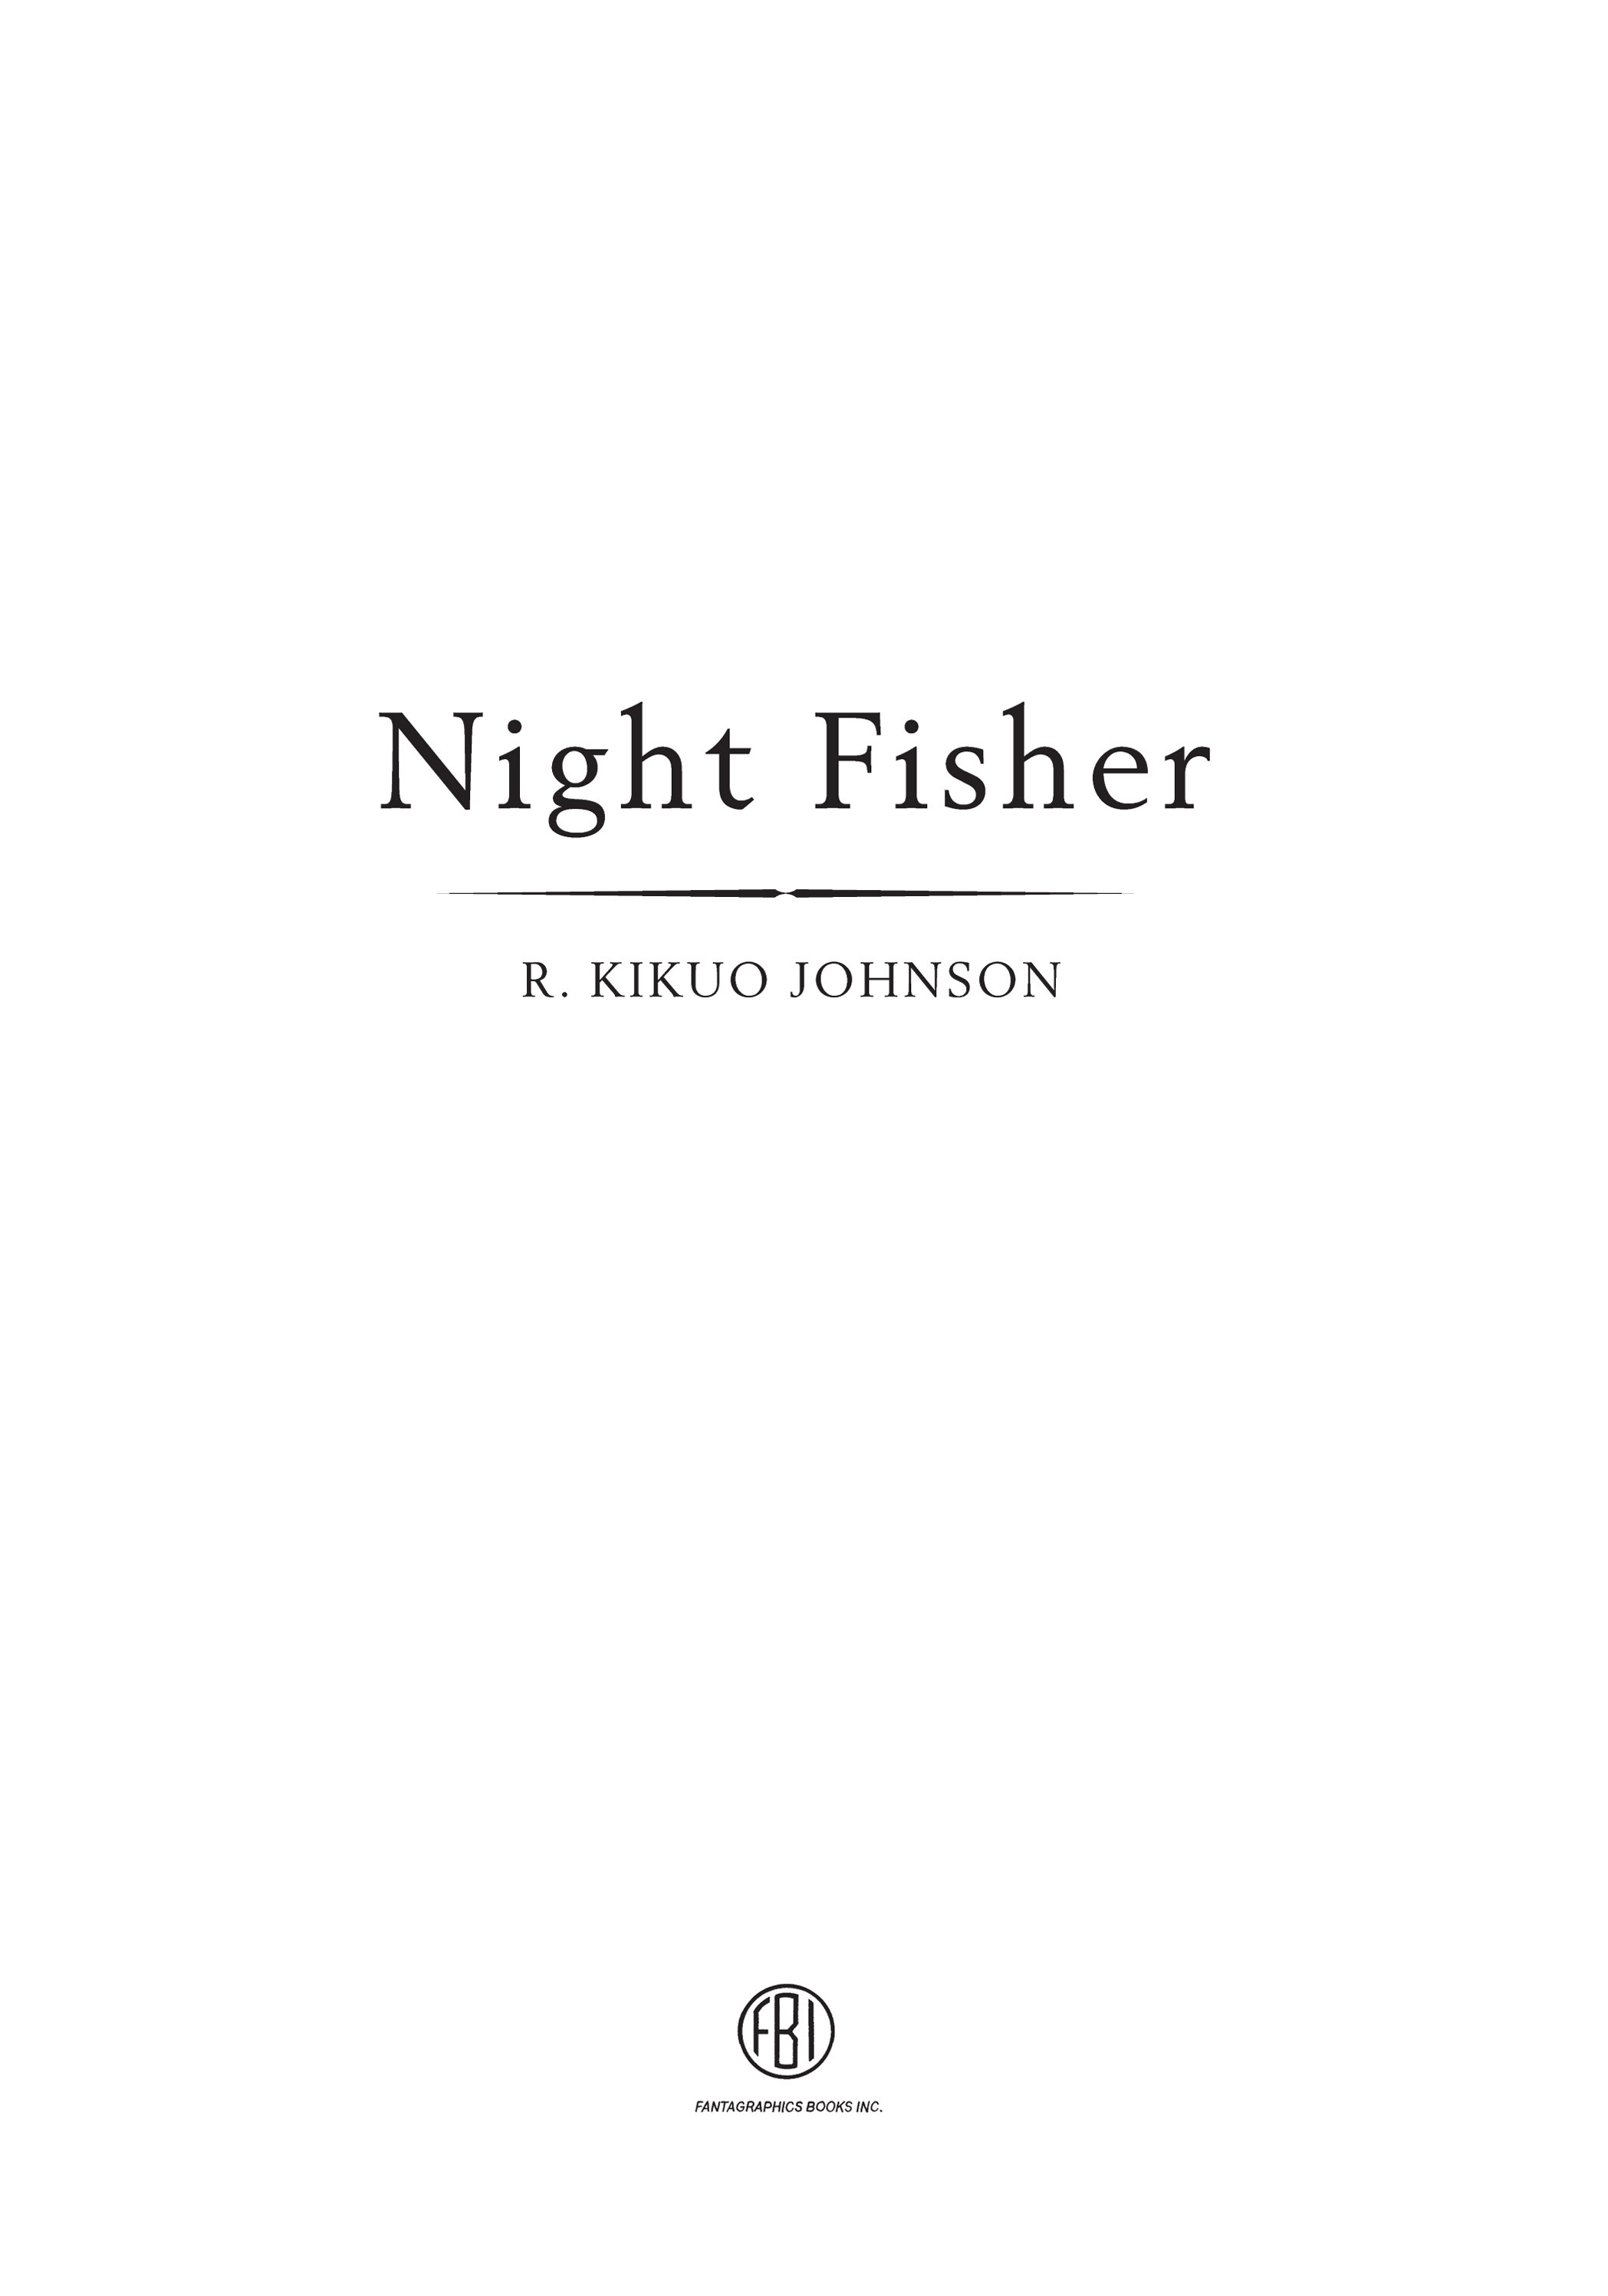 Read online Night Fisher comic -  Issue # TPB - 2